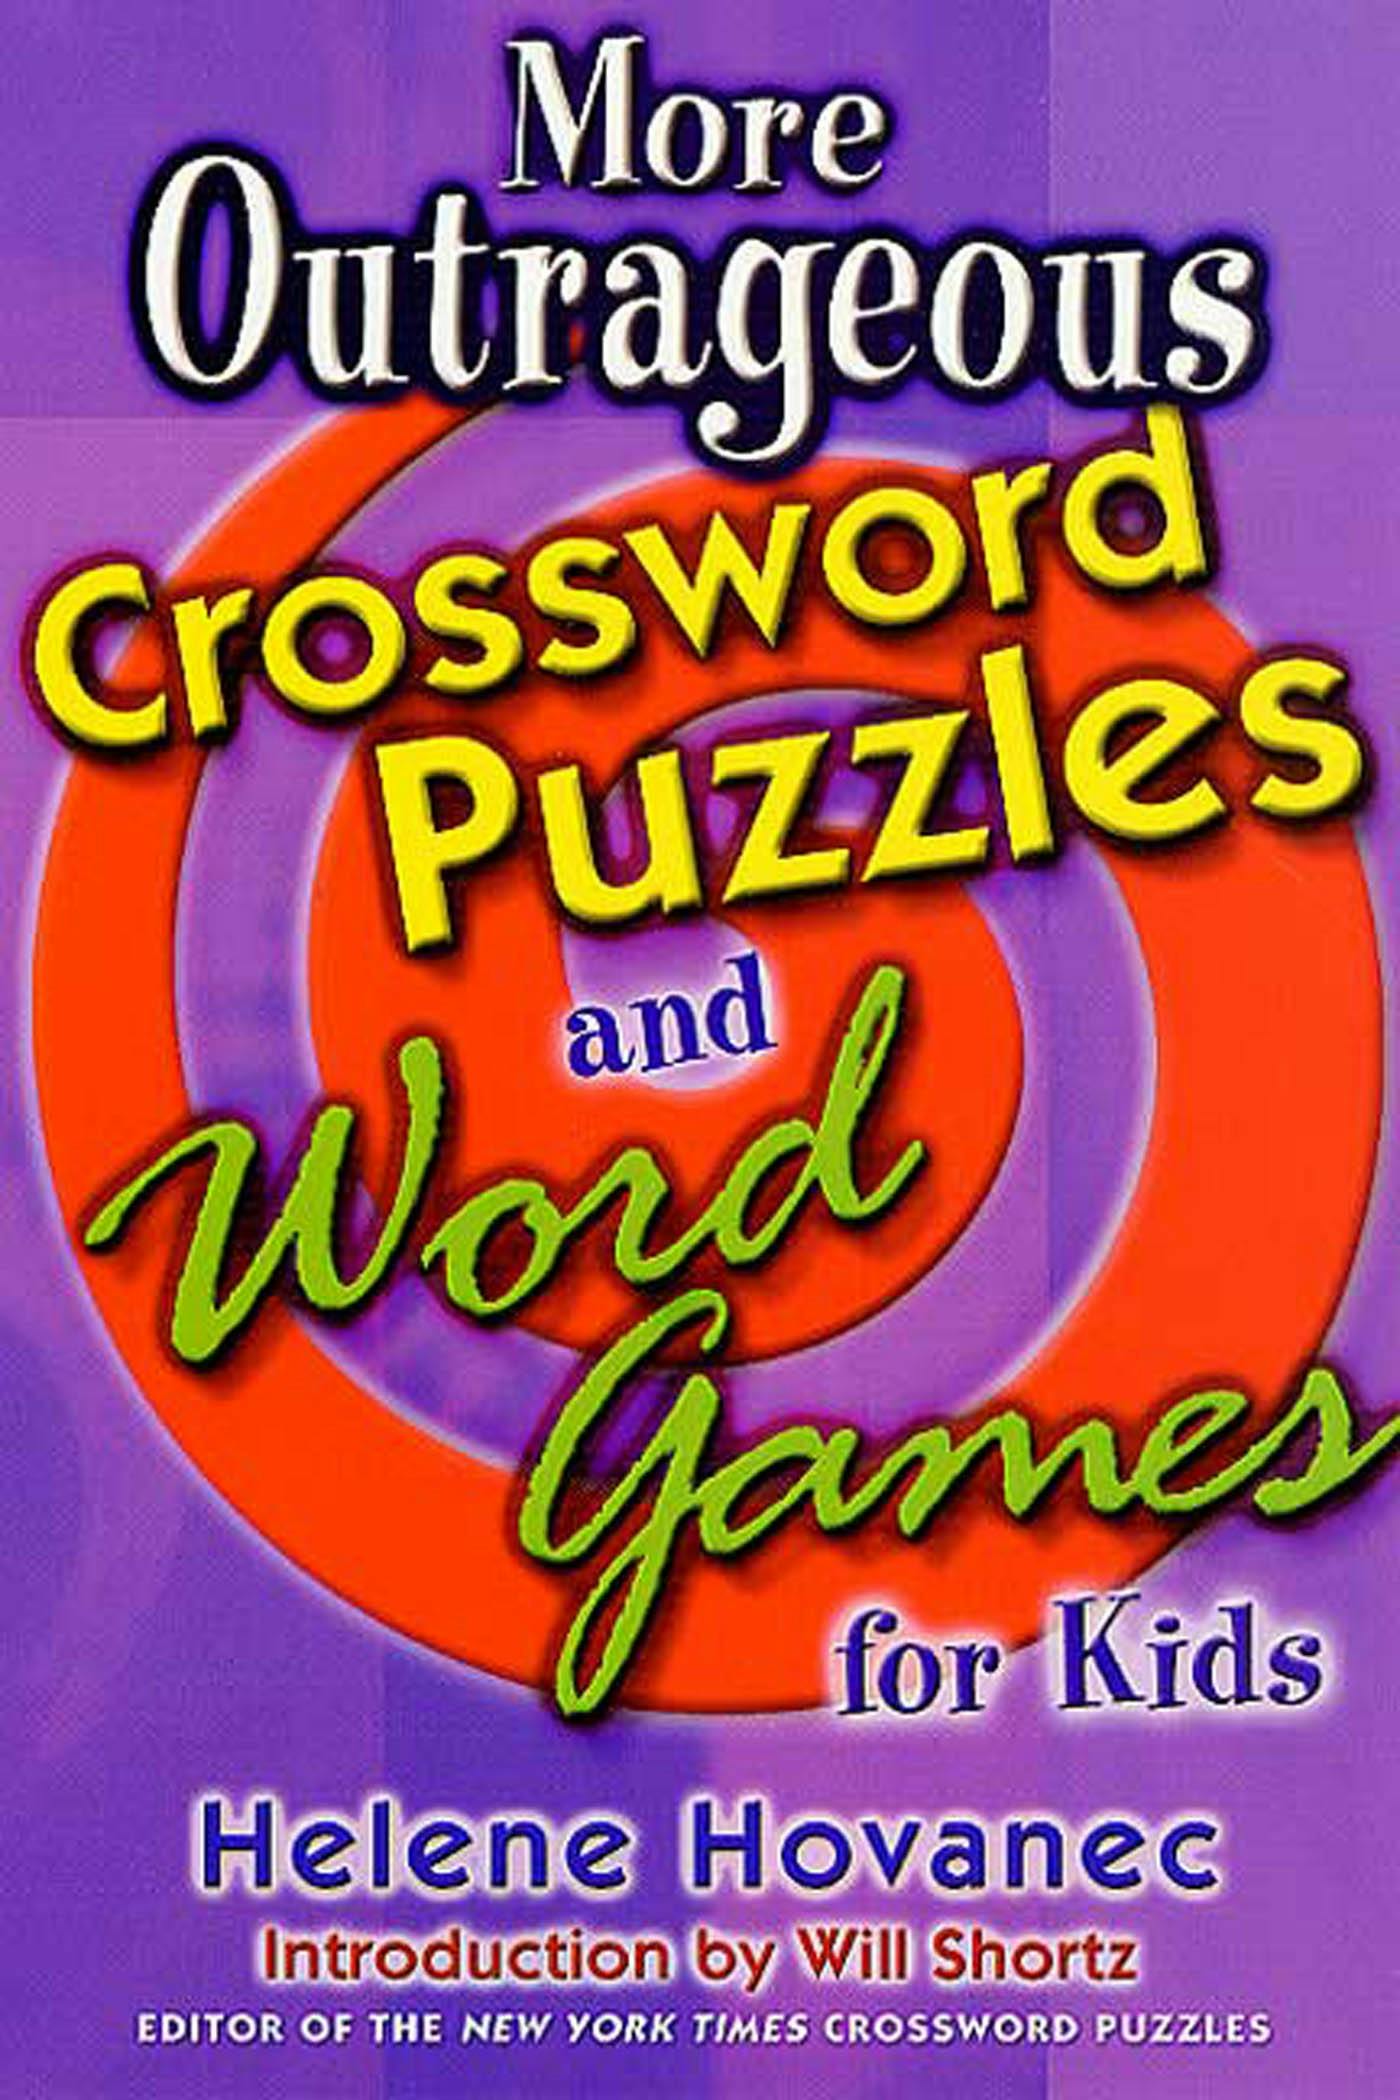 more-outrageous-crossword-puzzles-and-word-games-for-kids